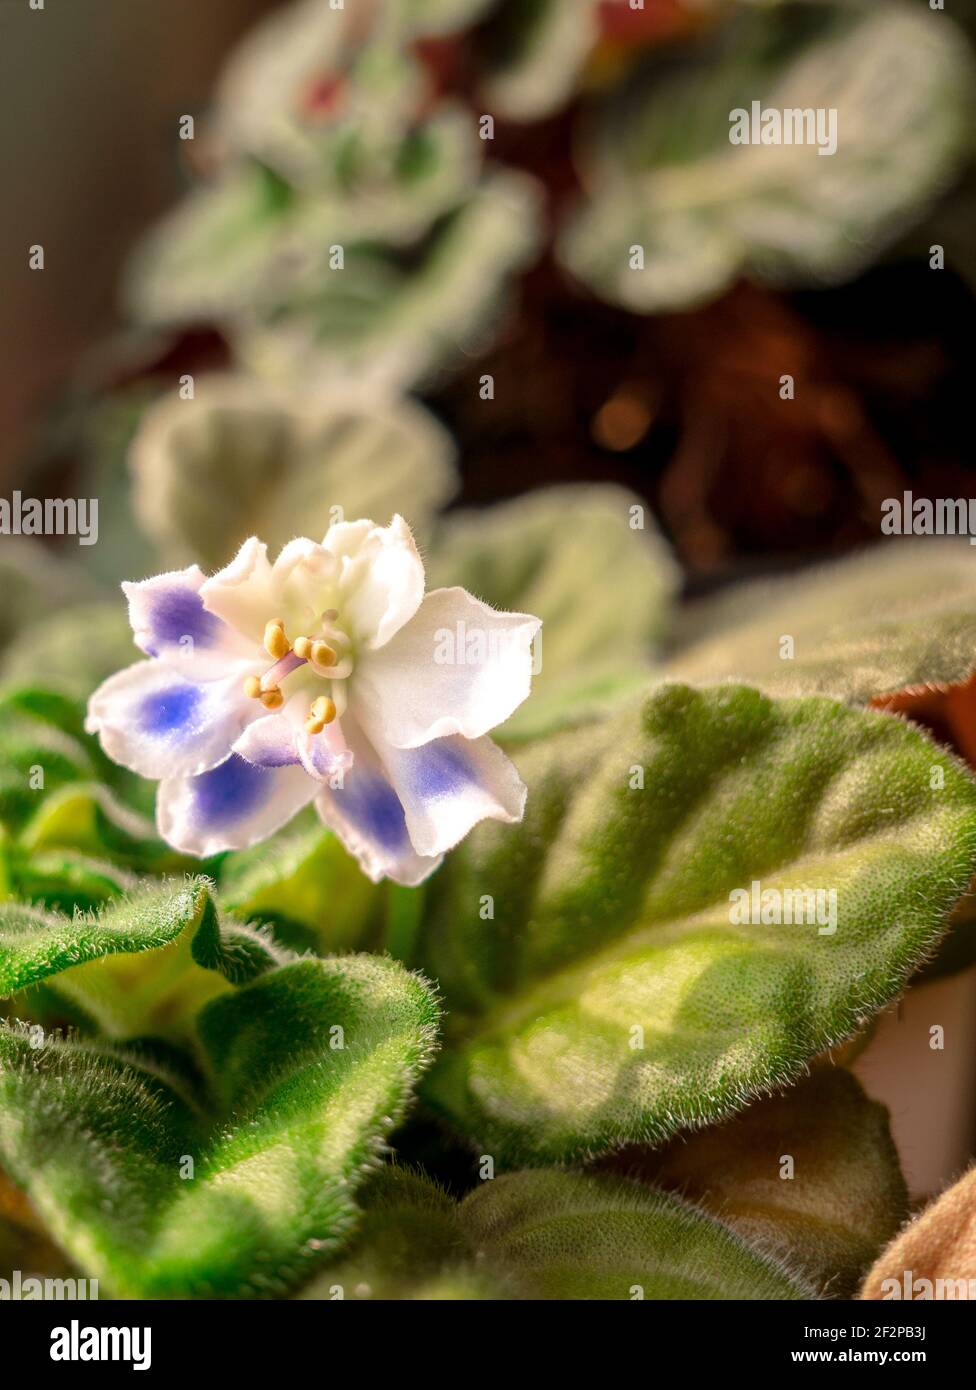 Close-up of not fully developed flower of white African violet (Saintpaulia) with blue spots on petals - Selective focus. Stock Photo